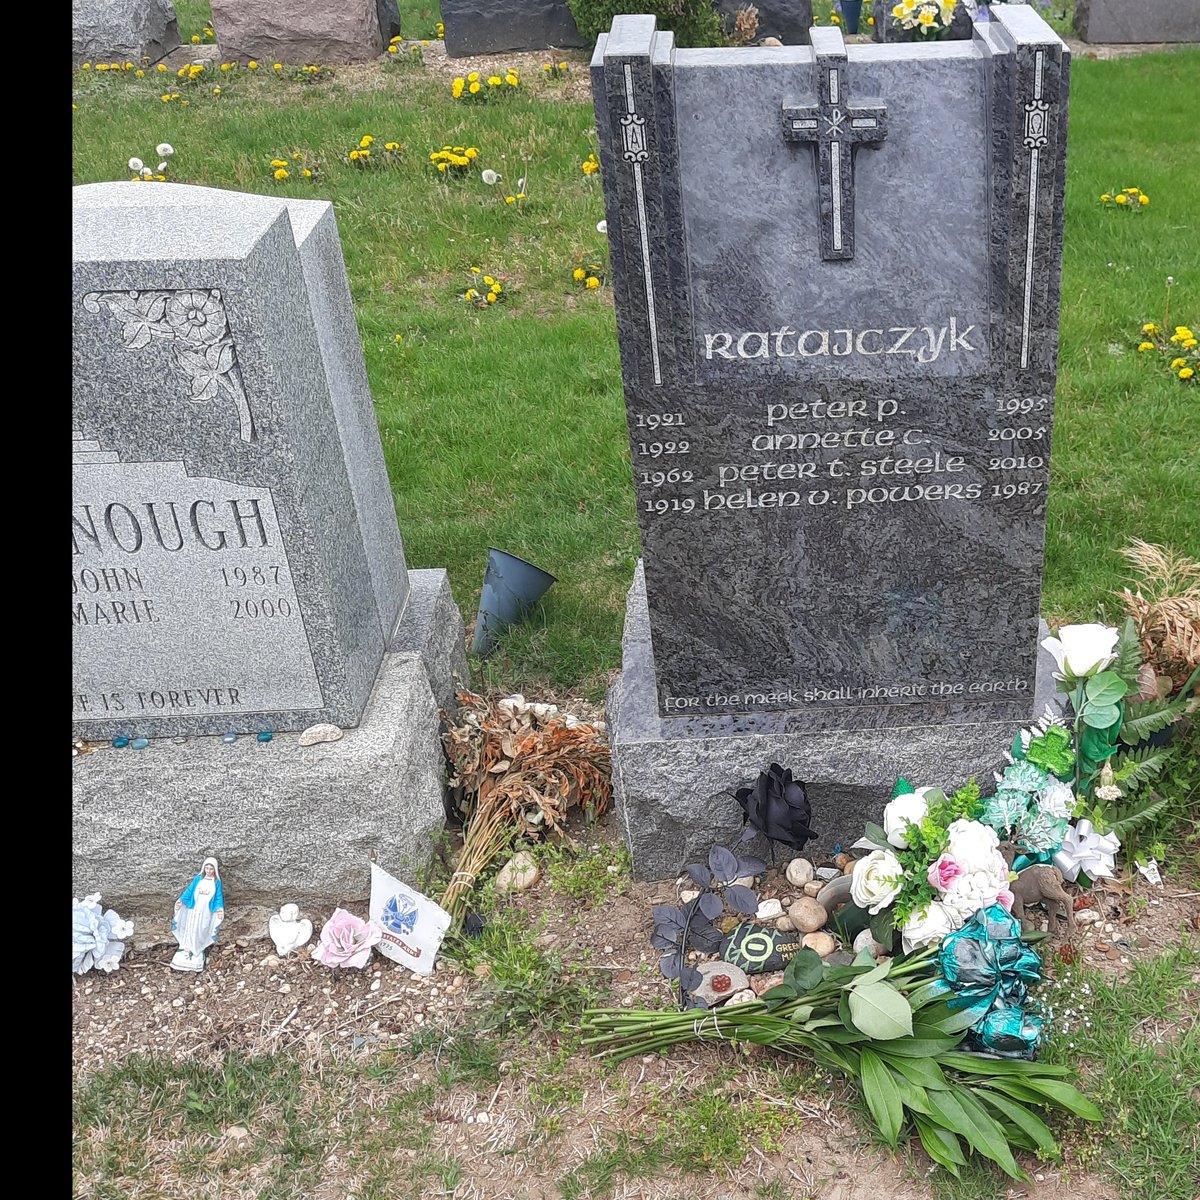 I paid respects to Peter Steele of @typeonegative this Saturday as friday was his 13 year anniversary of his passing #☆RipGreenMan #typeonegativefan #typeonegative #loveyoutodeath